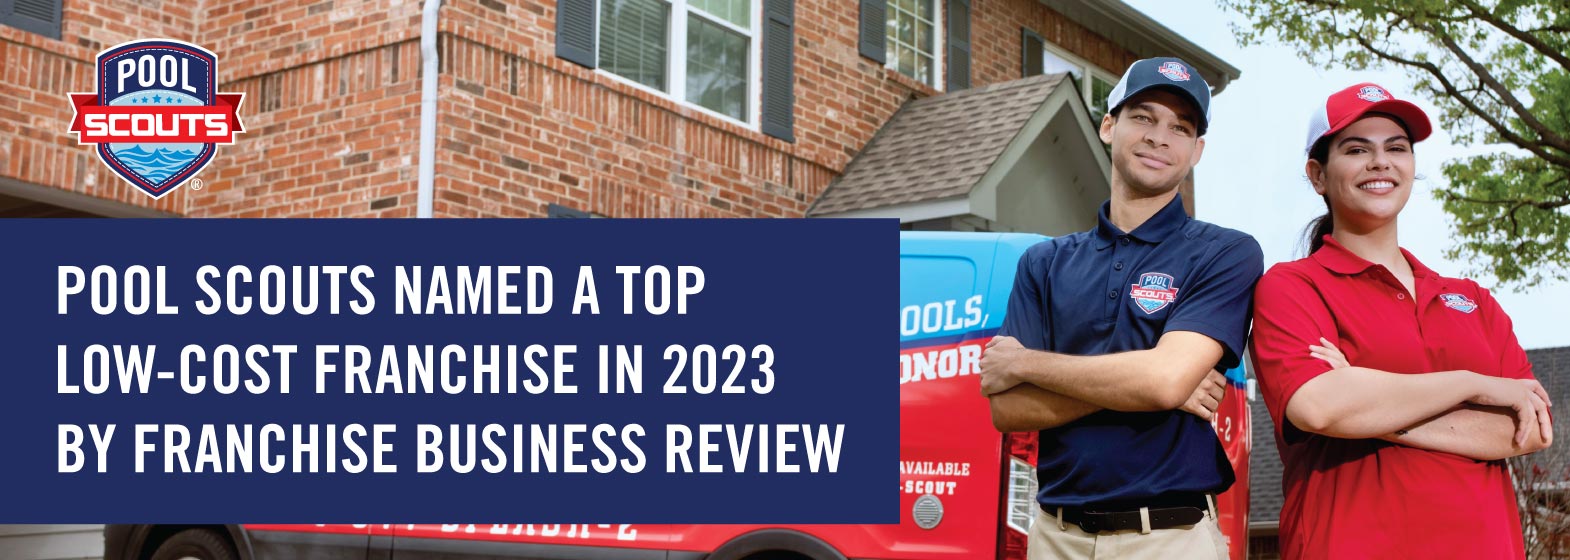 Pool Scouts Named a Top Low-Cost Franchise in 2023 by Franchise Business Review